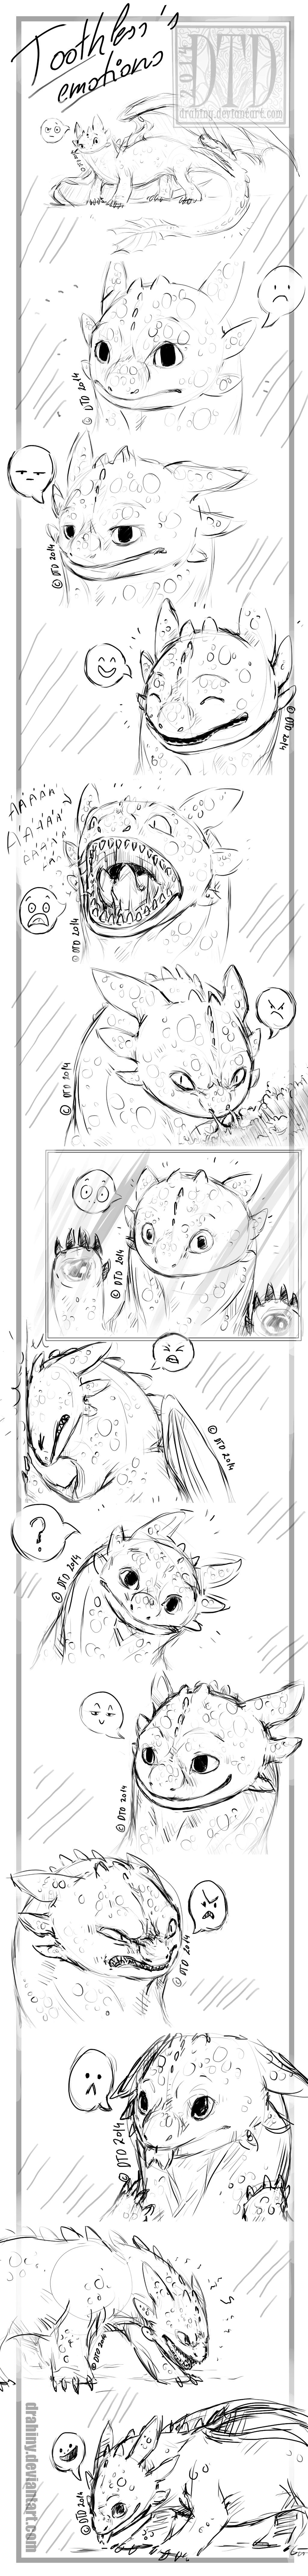 Toothless's emotions